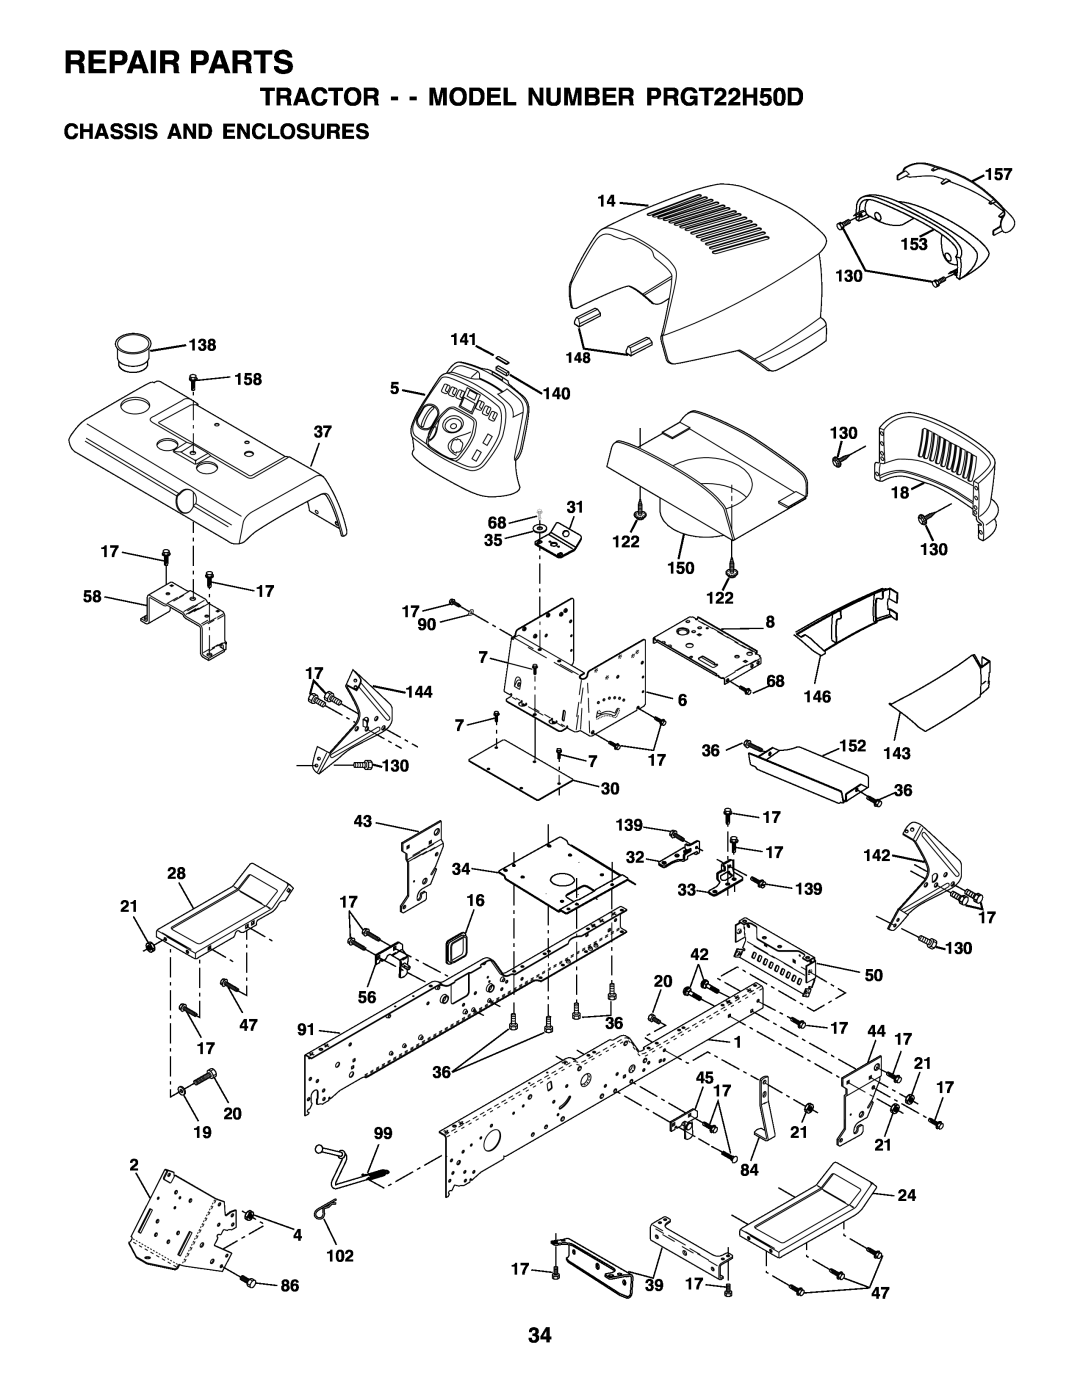 Poulan owner manual Repair Parts, TRACTOR - - MODEL NUMBER PRGT22H50D, Chassis And Enclosures 